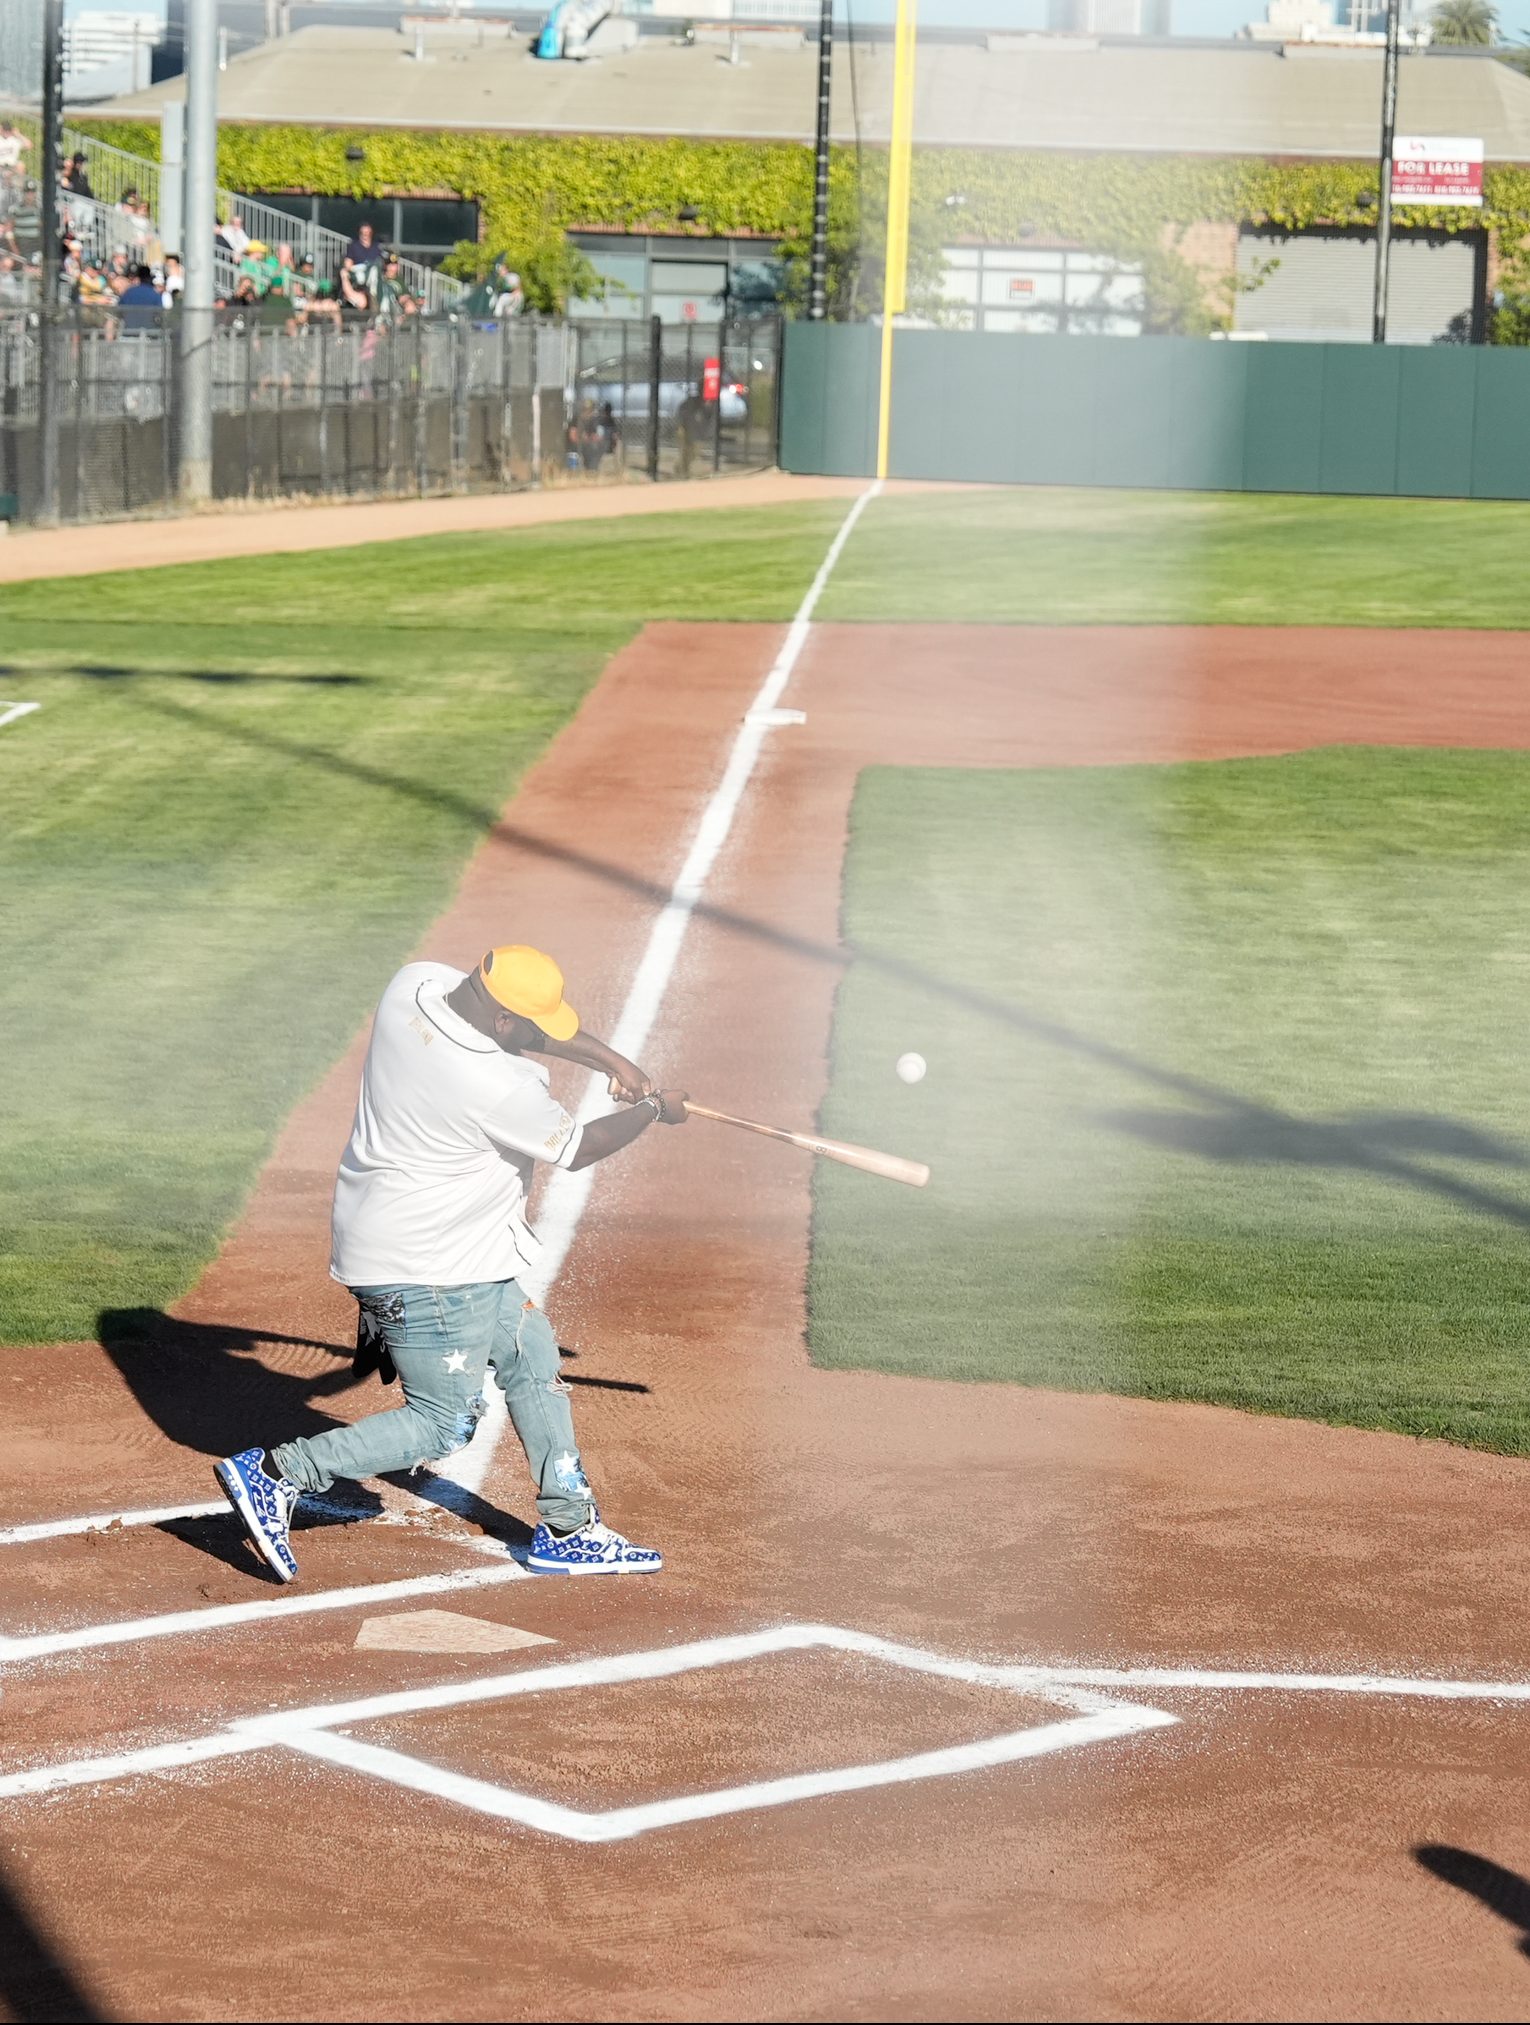 A person in a yellow cap and distressed jeans is swinging a bat at a baseball on a field, with the ball in mid-air and spectators visible in the background.